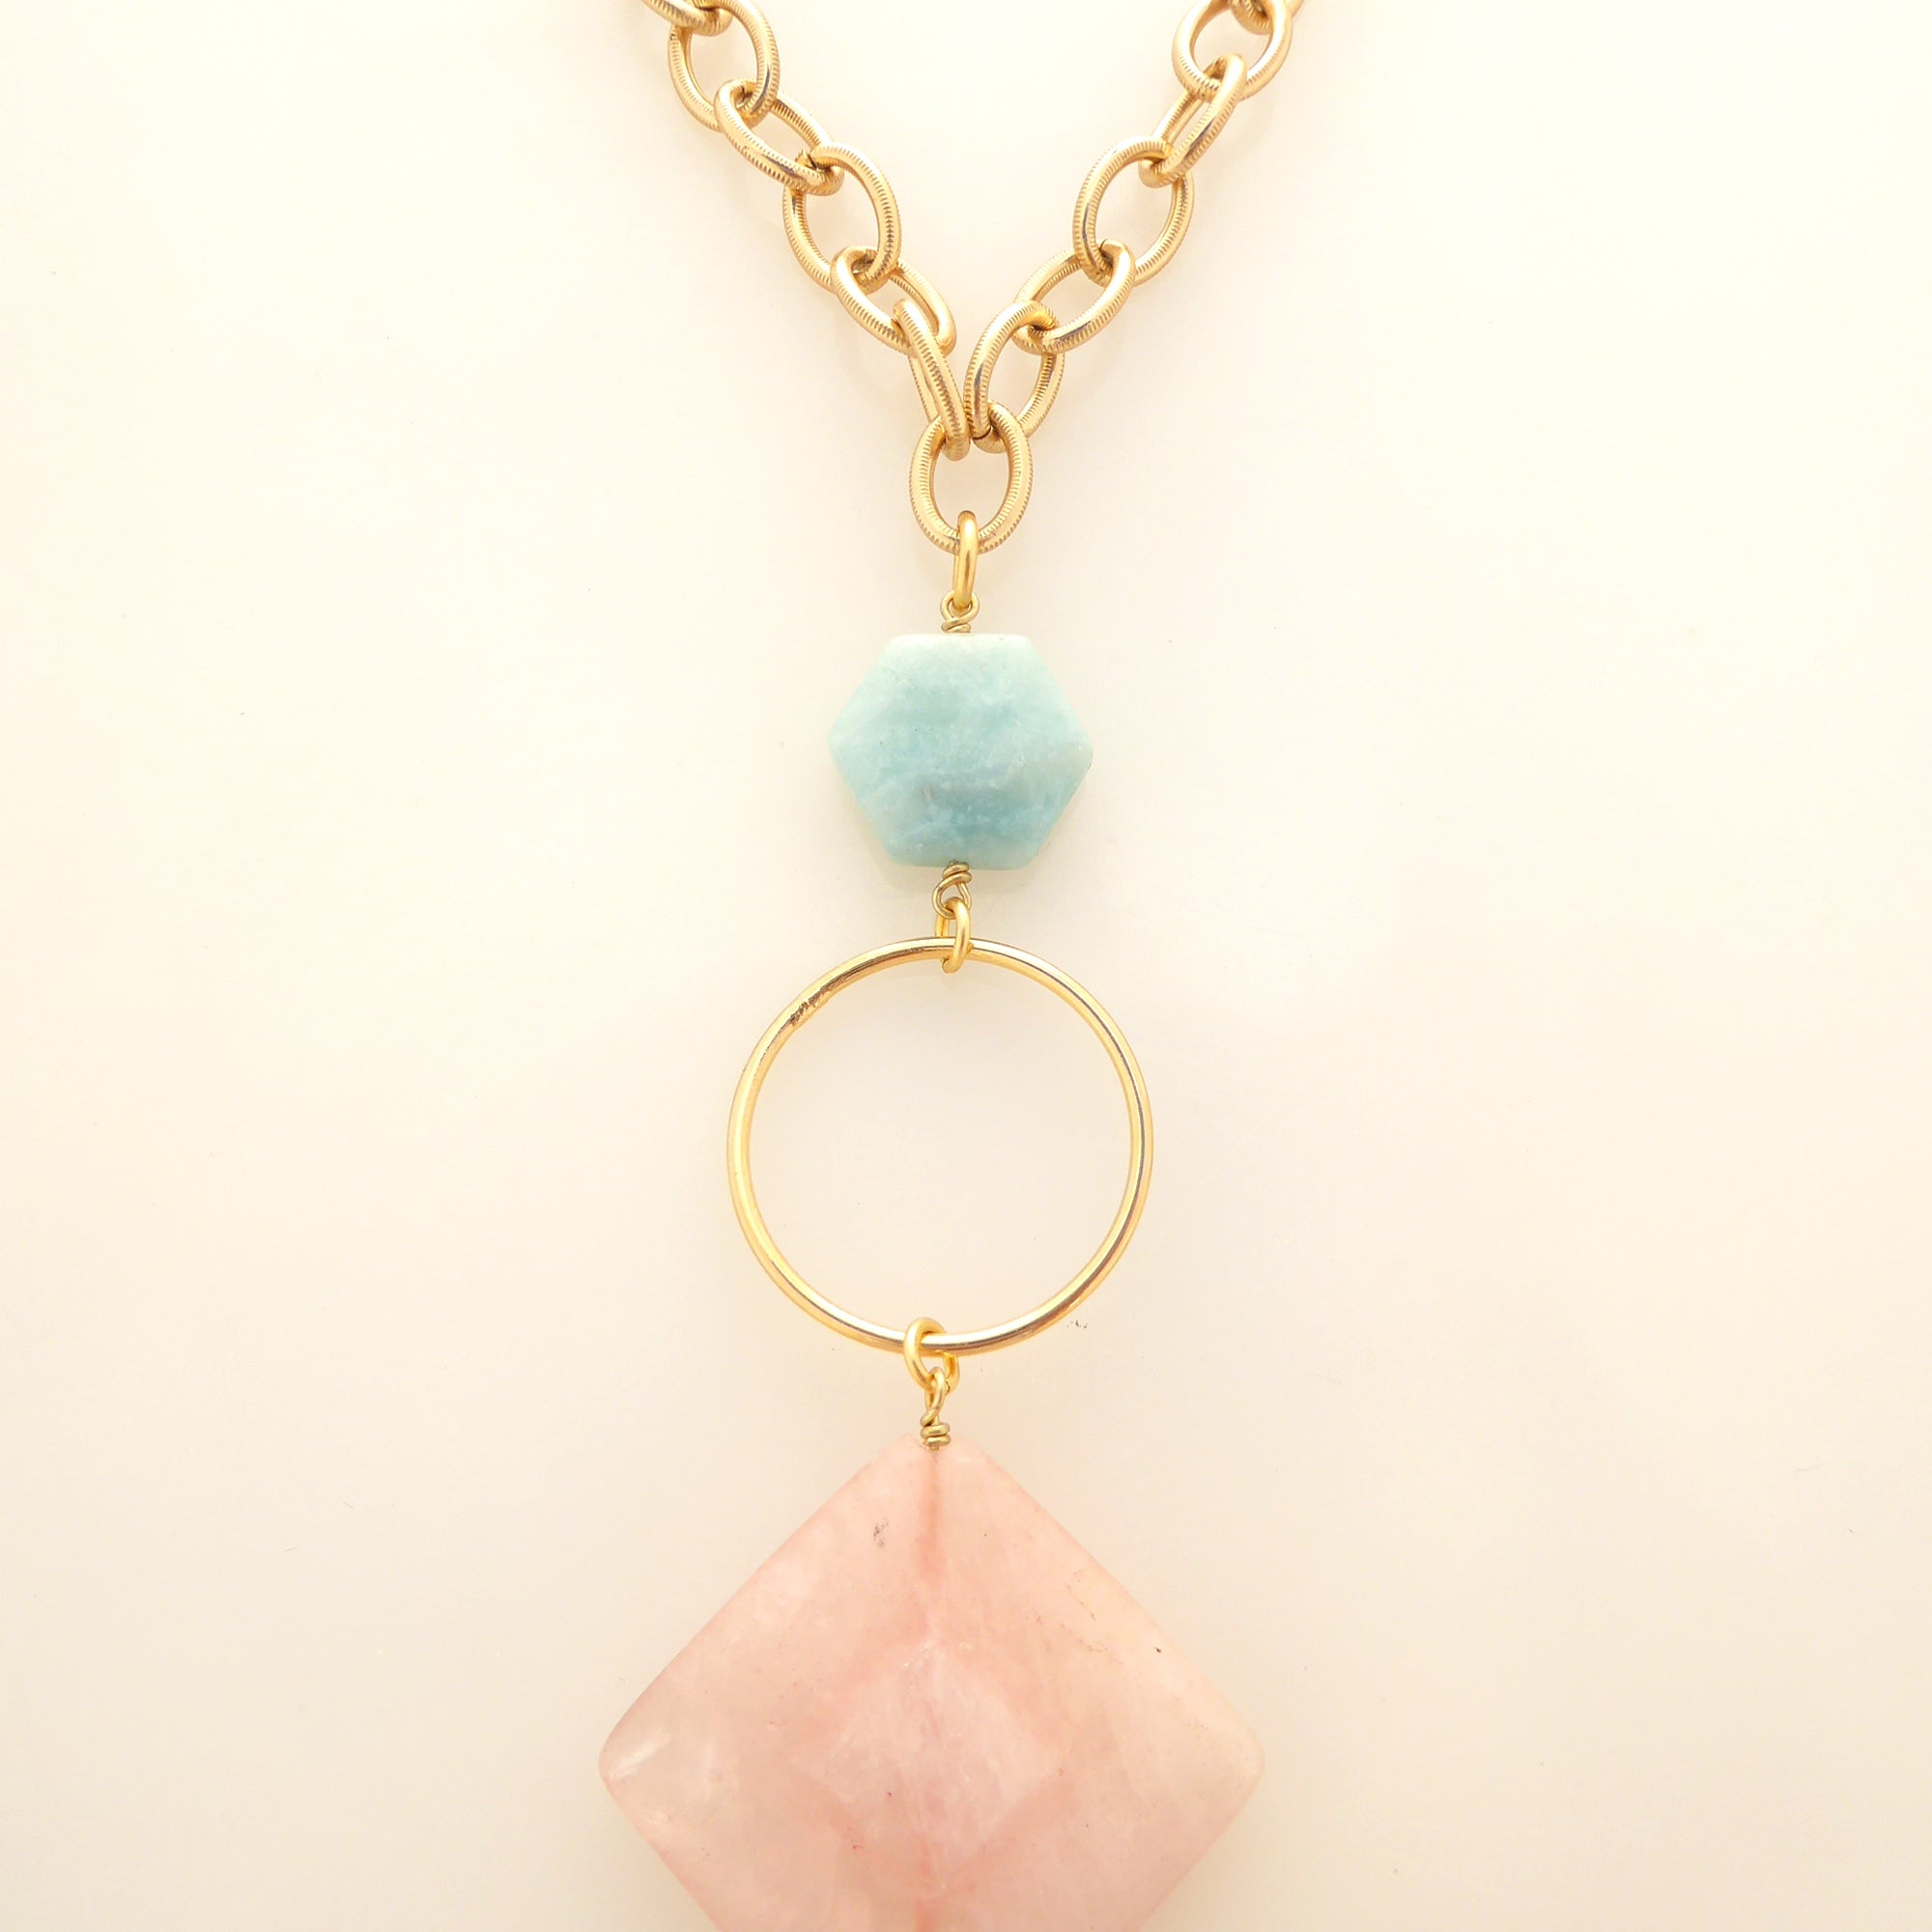 Gioia amazonite and rose quartz necklace by Jenny Dayco 5